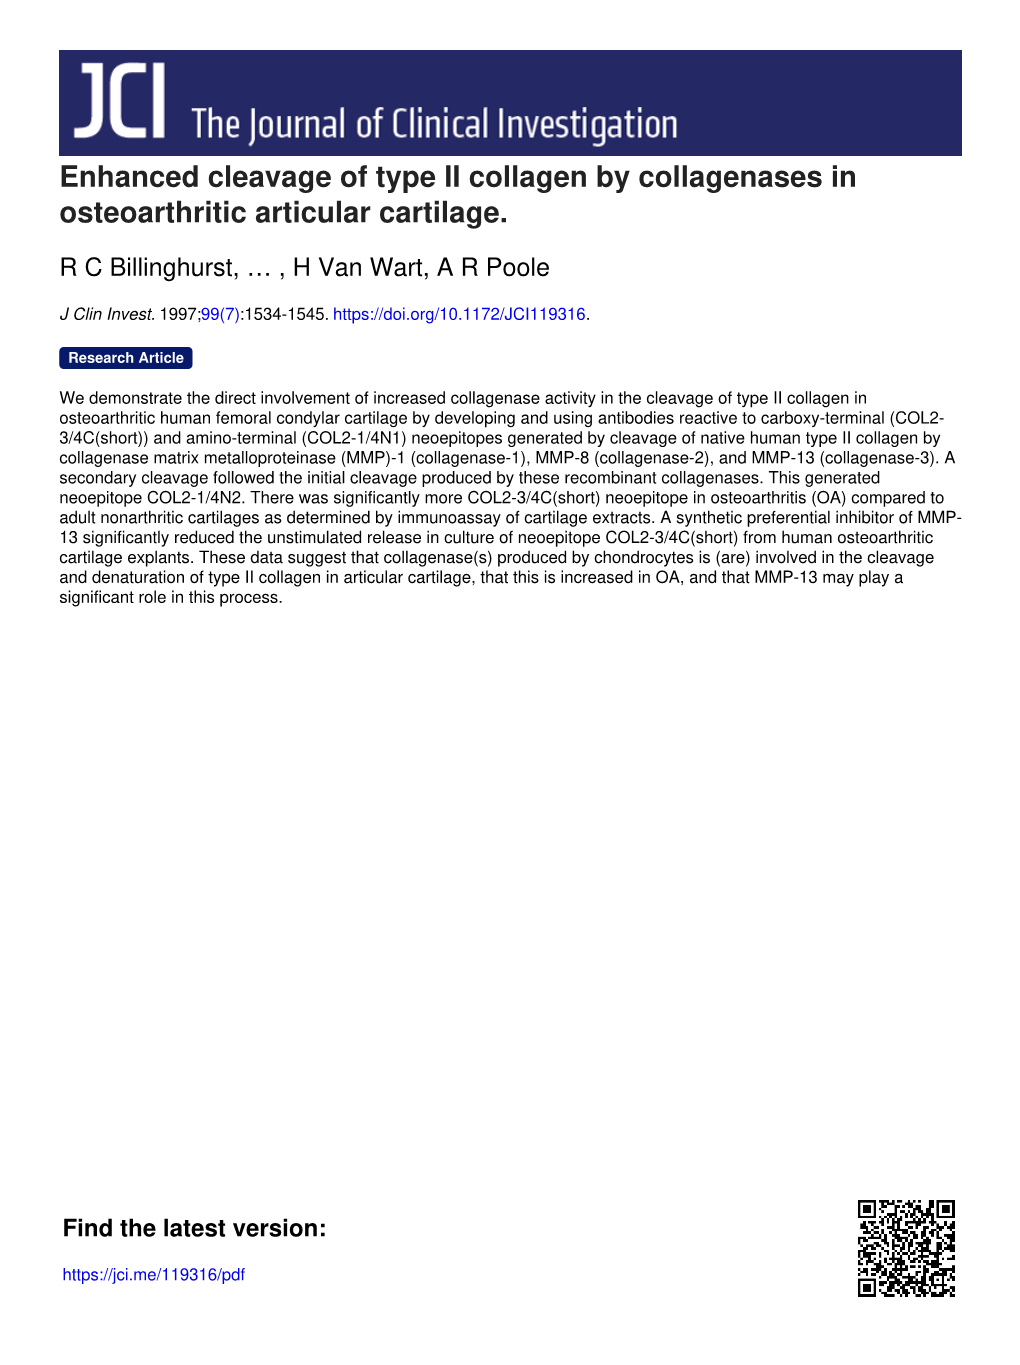 Enhanced Cleavage of Type II Collagen by Collagenases in Osteoarthritic Articular Cartilage